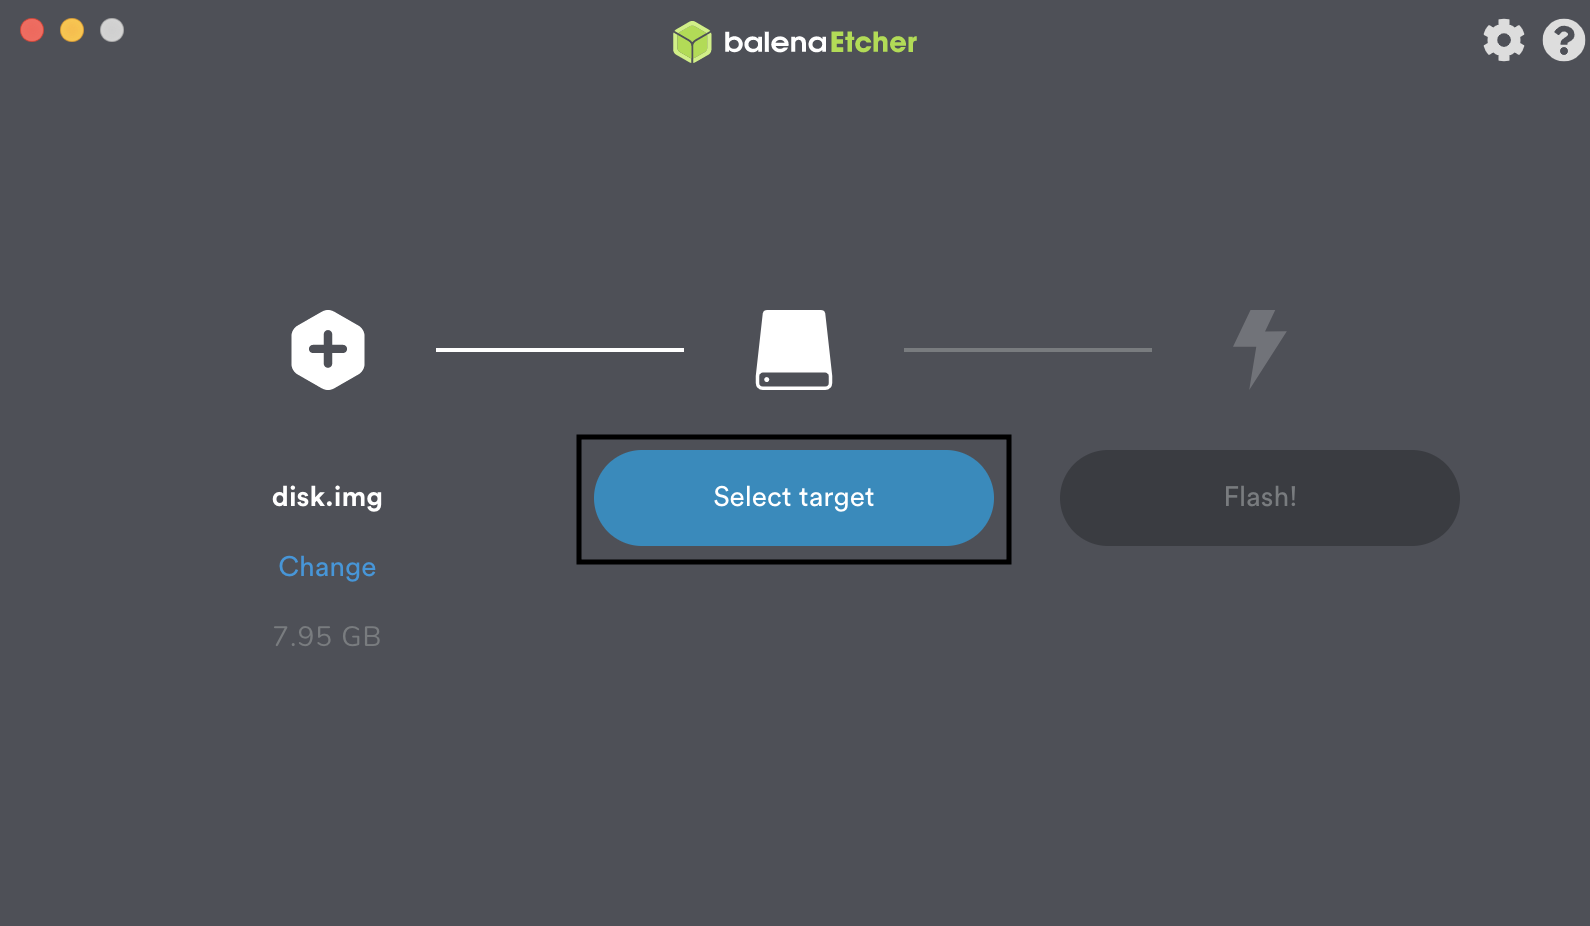 This image shows the "Select target" button in BalenaEtcher.